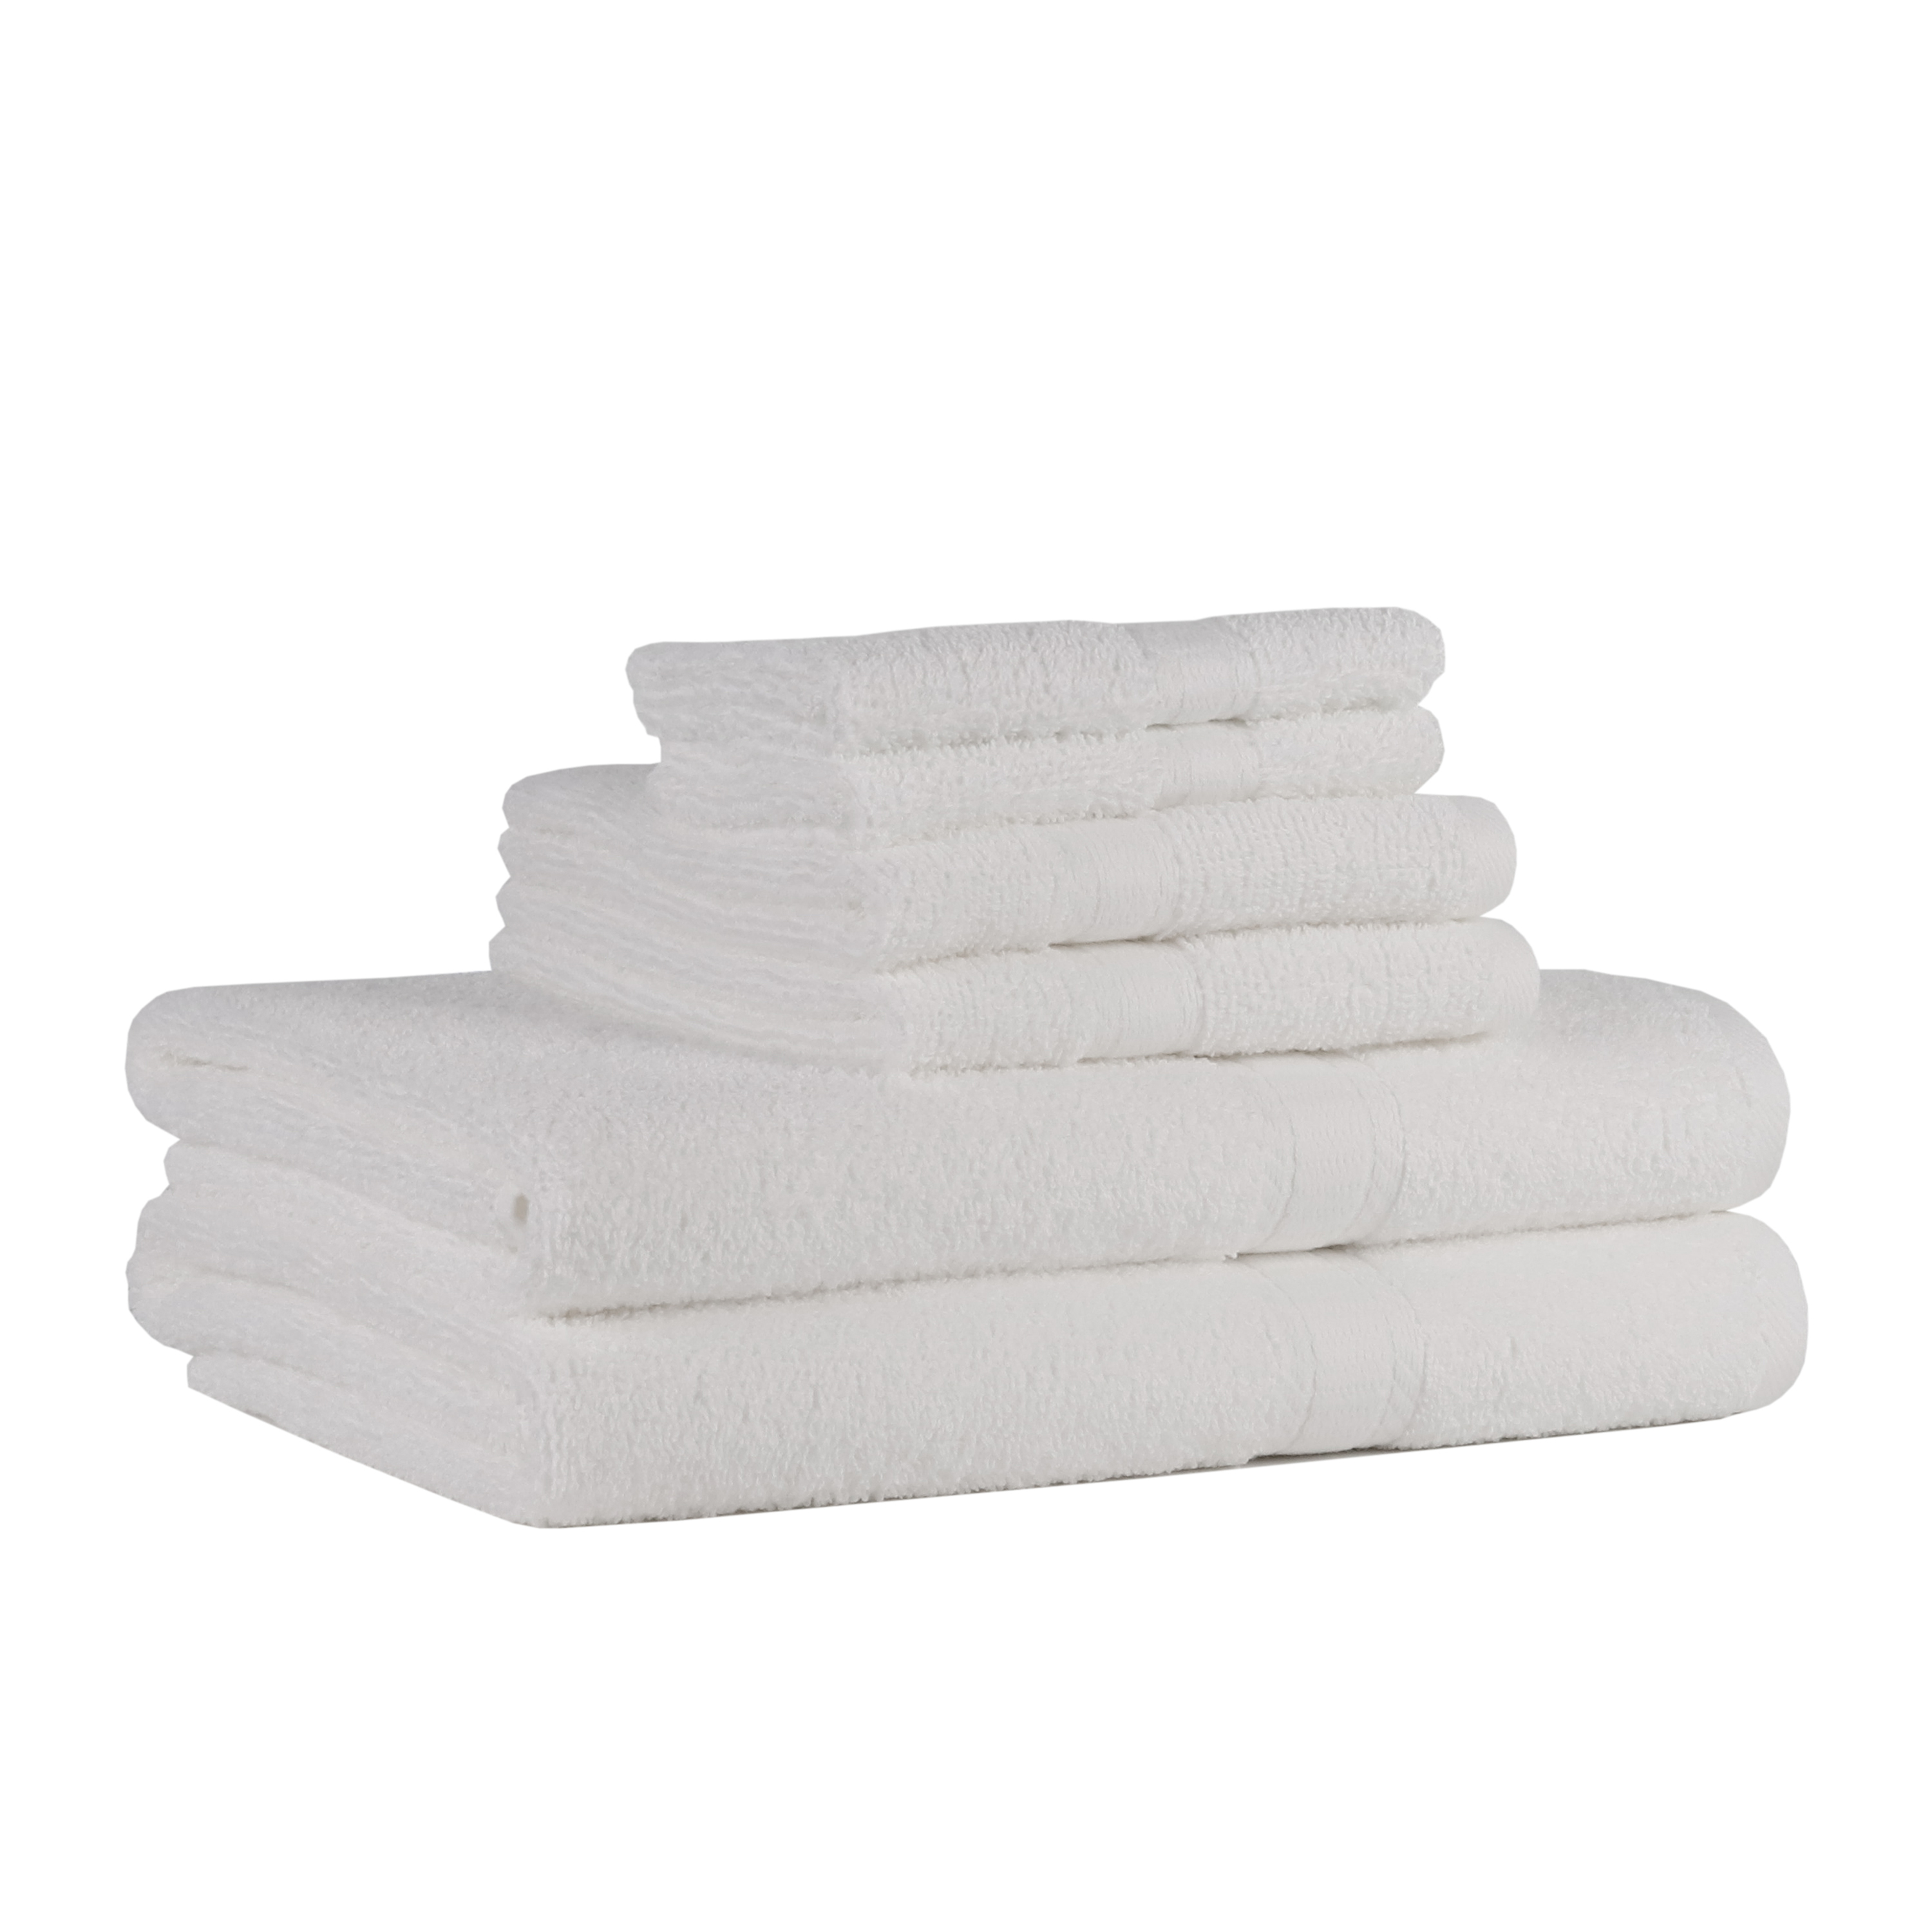 Mainstays Solid Adult 6-Piece Bath Towel Set, White - image 3 of 10